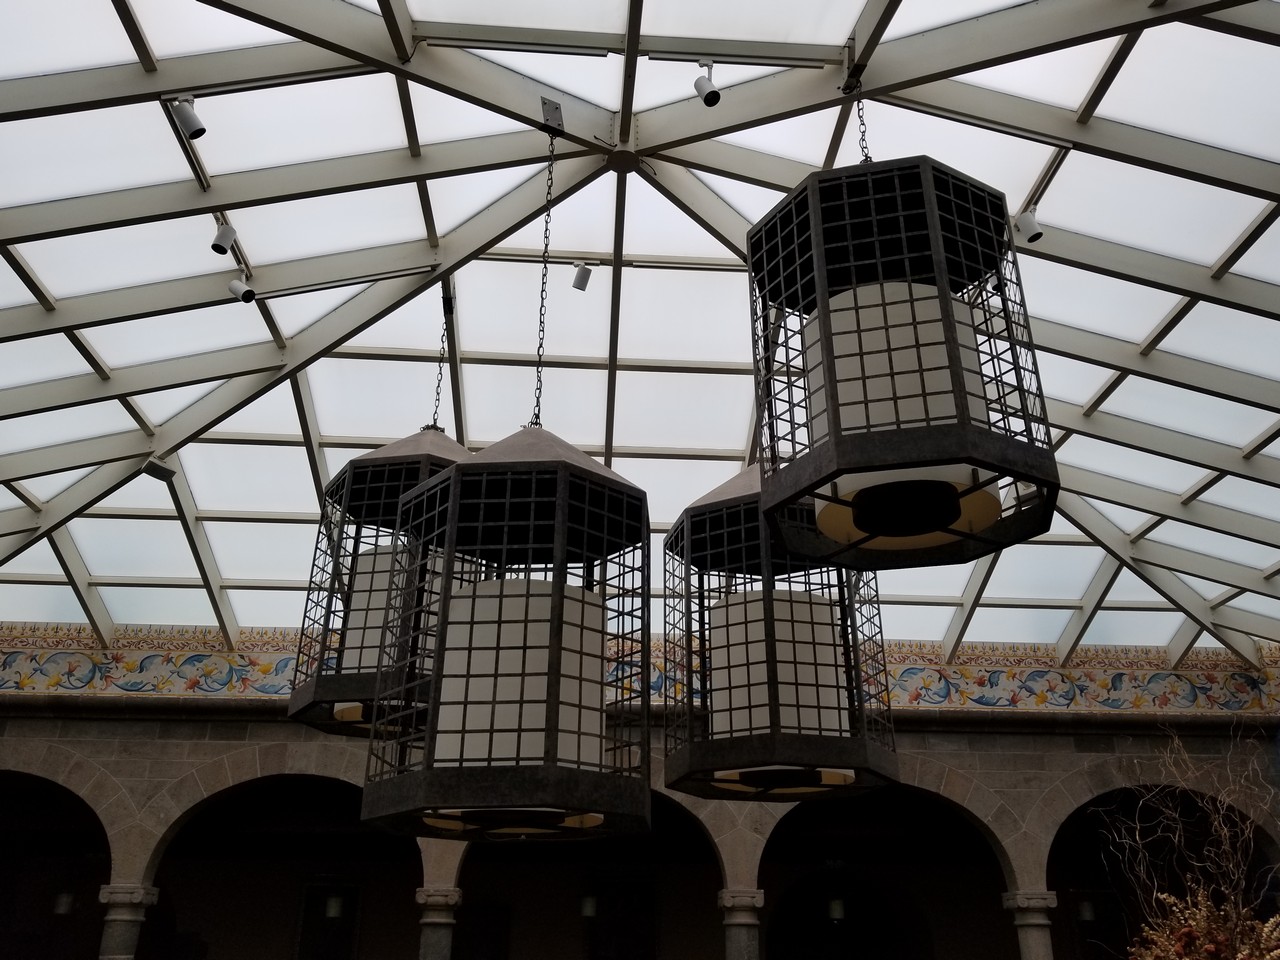 a group of lanterns from a ceiling